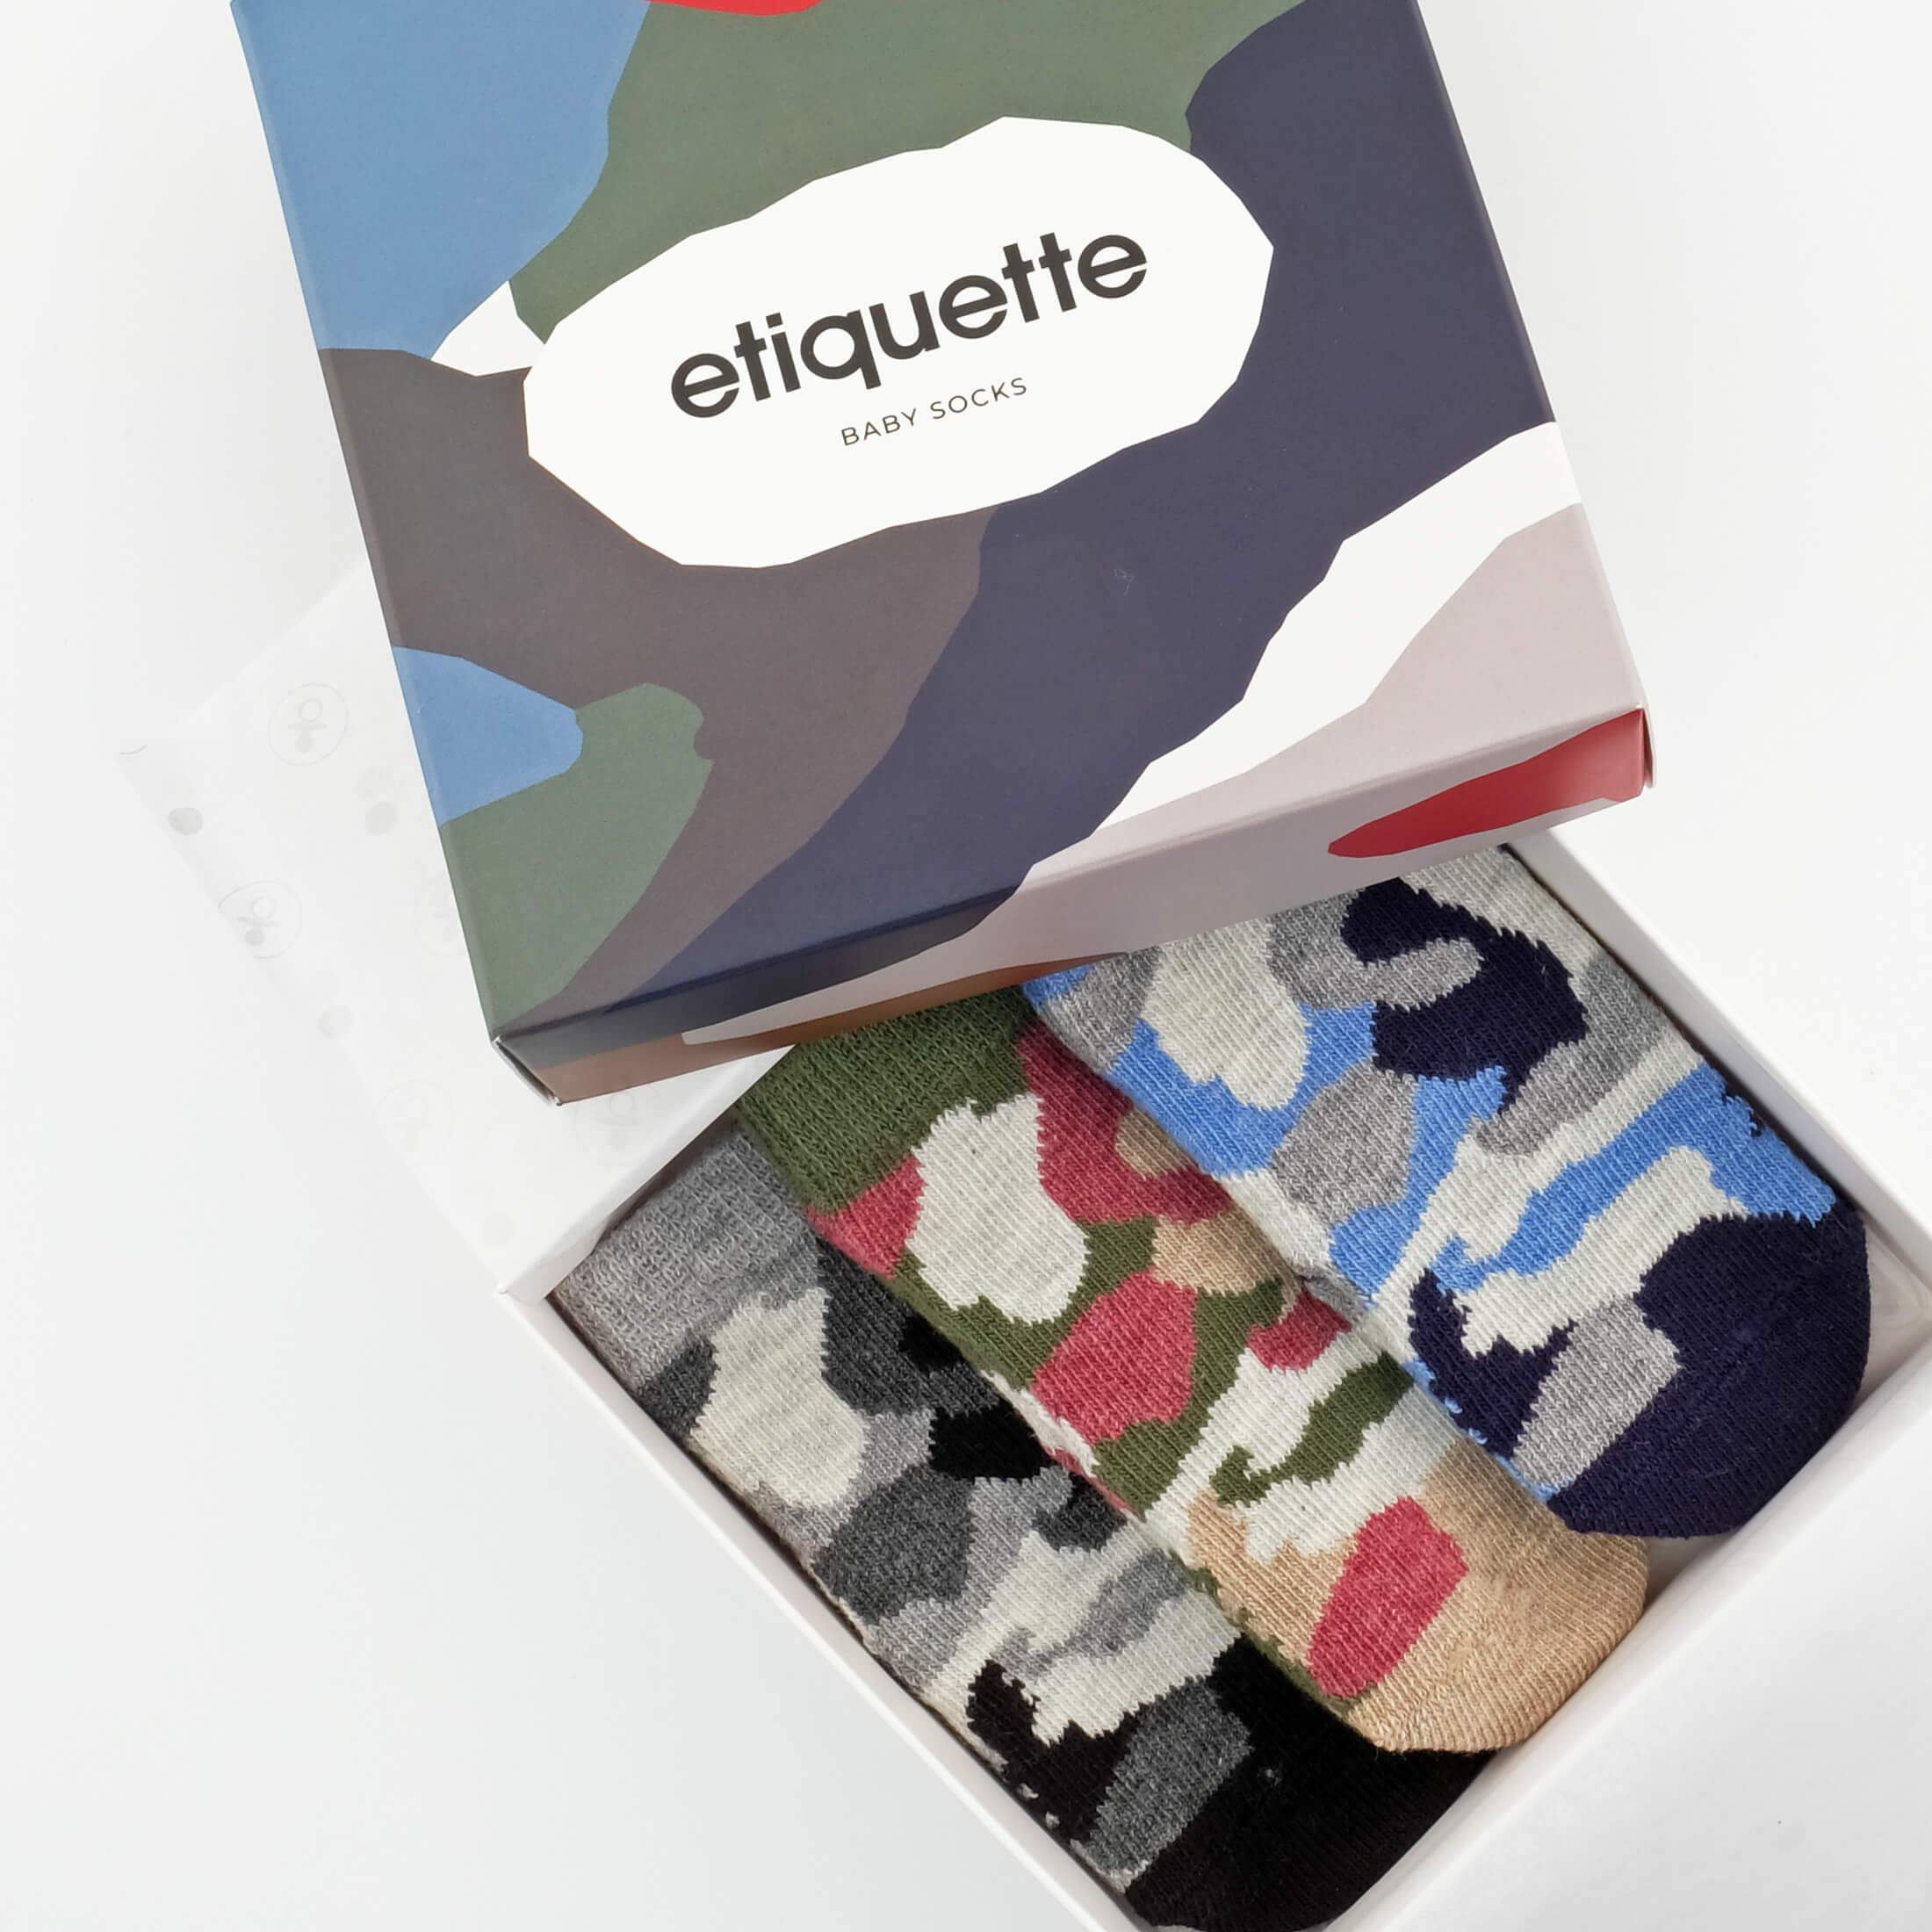 Camouflage Baby Socks Gift Box - Camo army Pattern - box view⎪Lil' Etiquette Clothiers